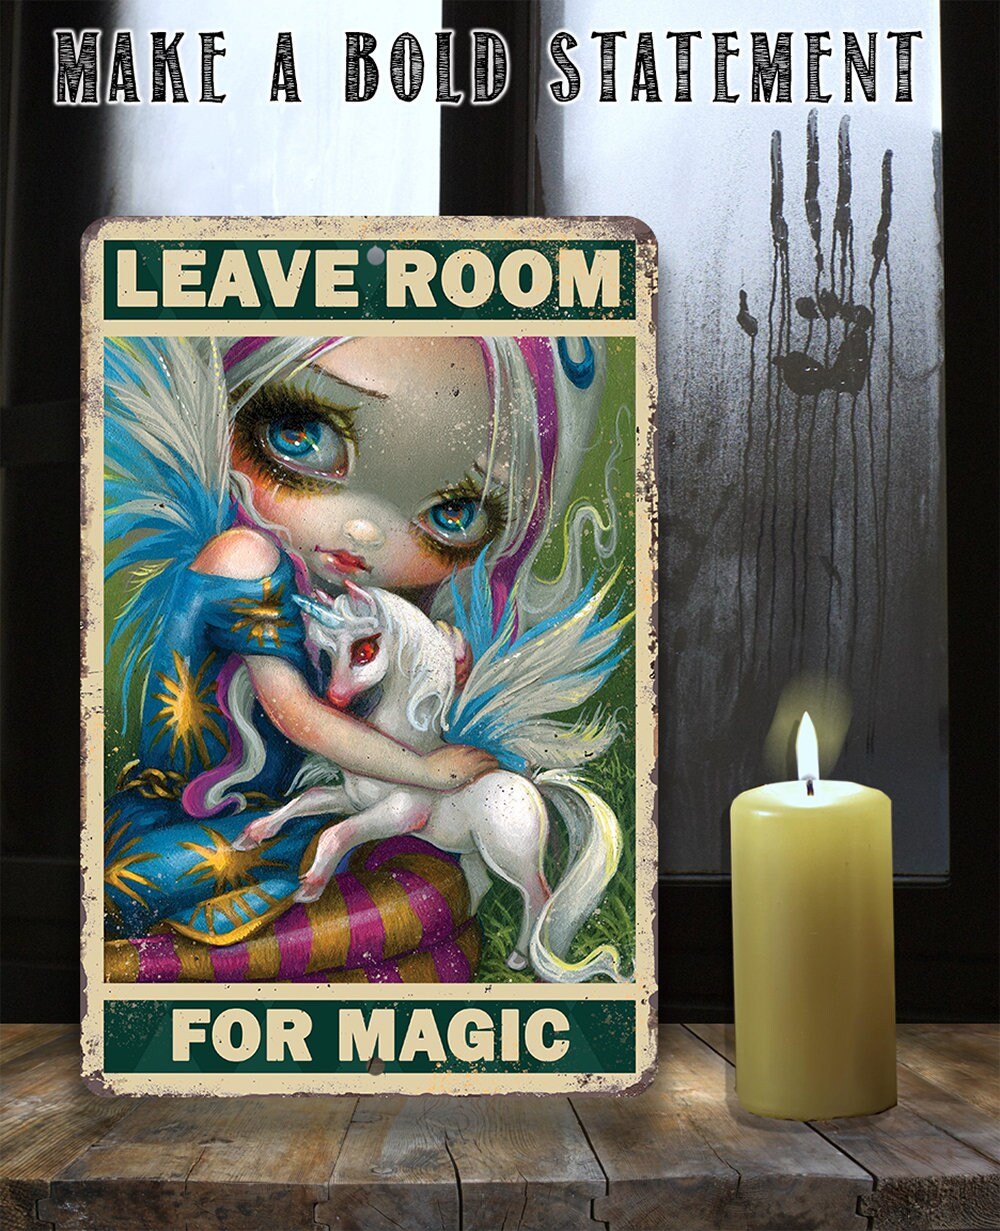 Leave Room For Magic 8" x 12" or 12" x 18" Aluminum Tin Awesome Gothic Metal Poster Lone Star Art 